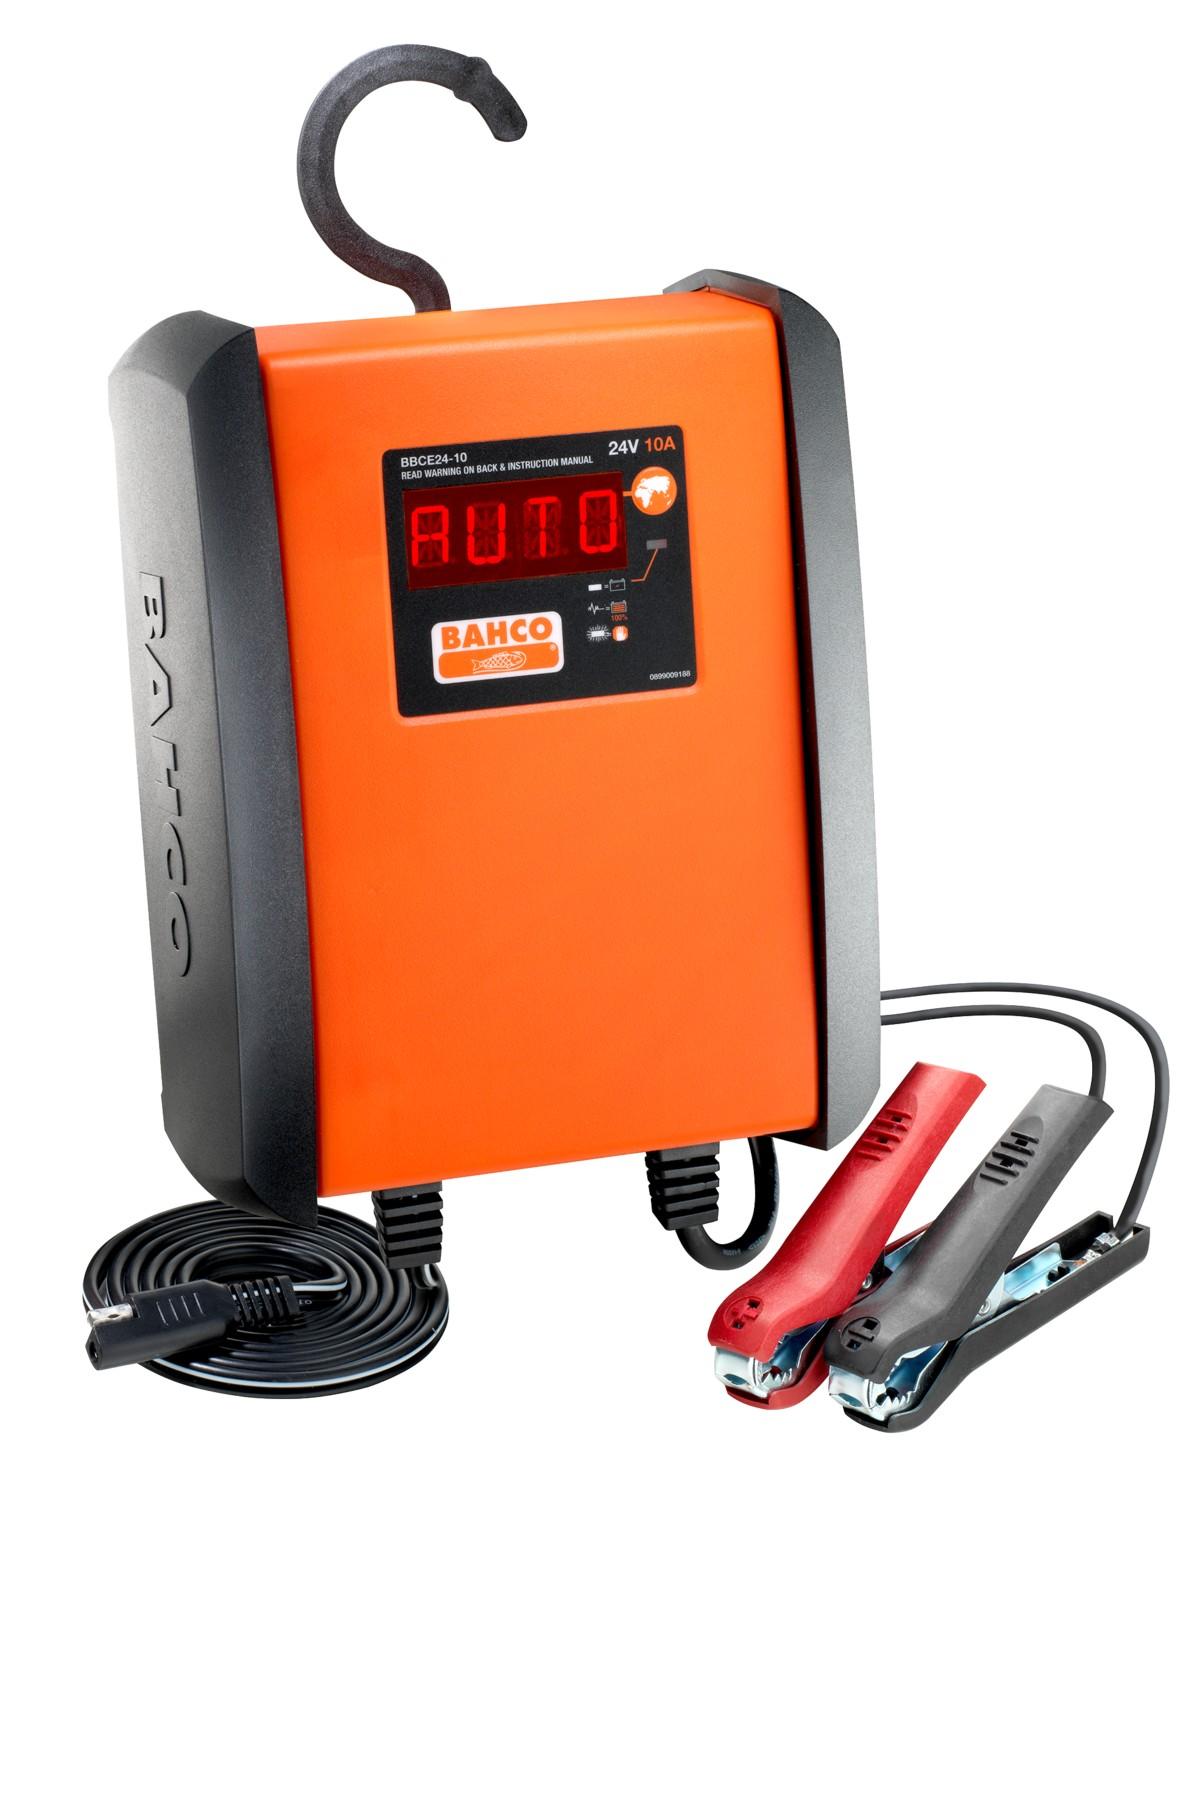 Fully automatic battery charger/maintenance charger for 24V batteries 10A